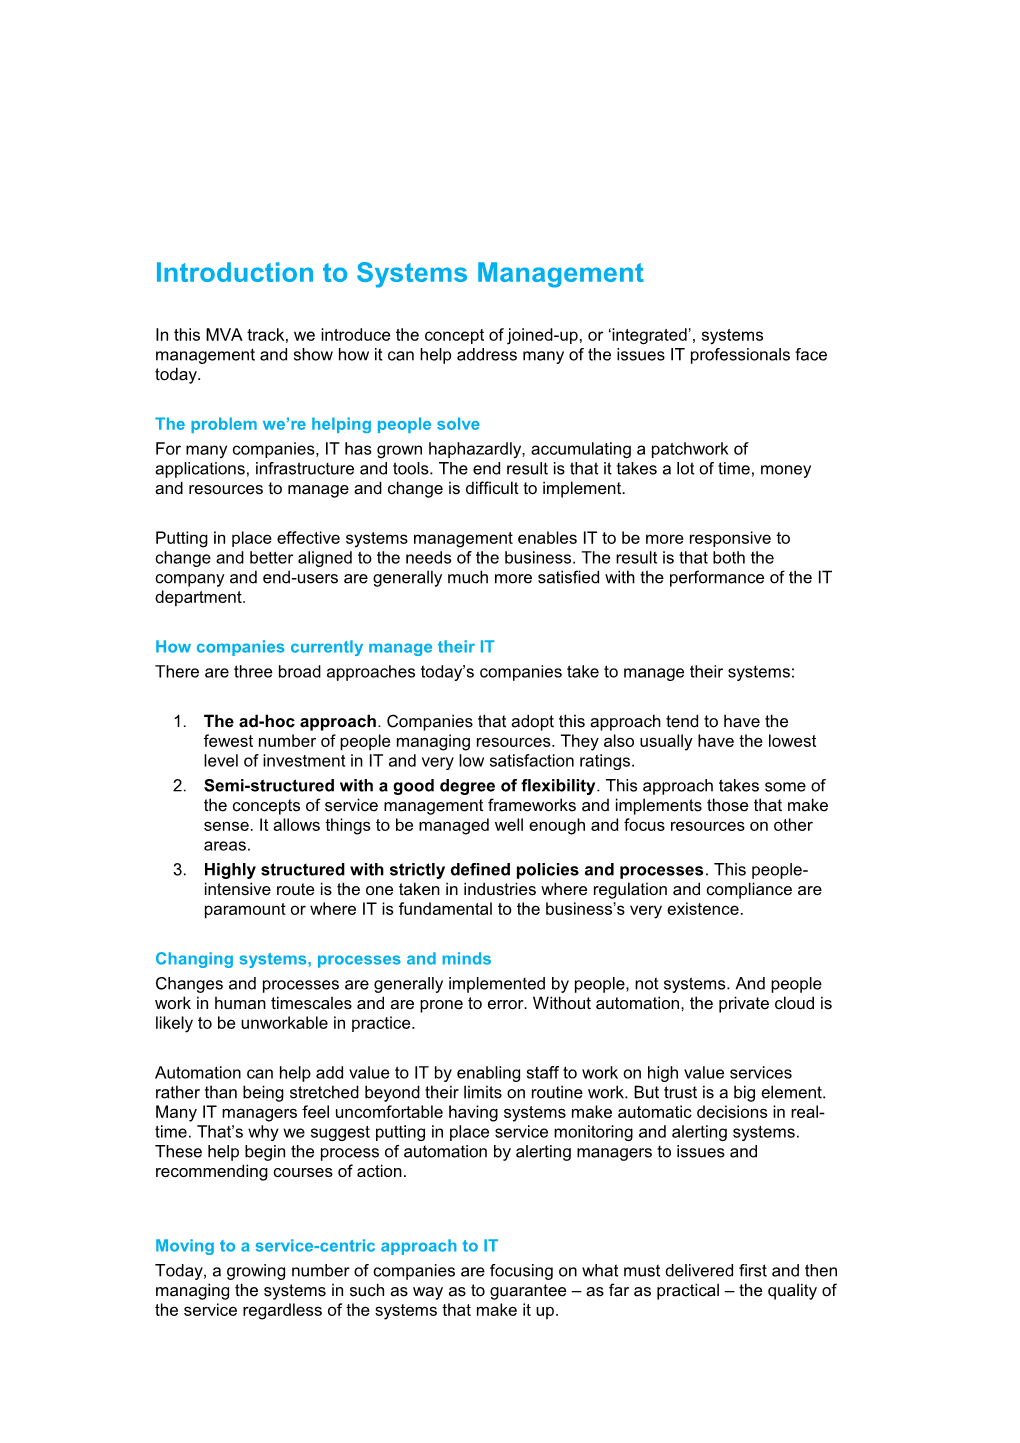 Introduction to Systems Management